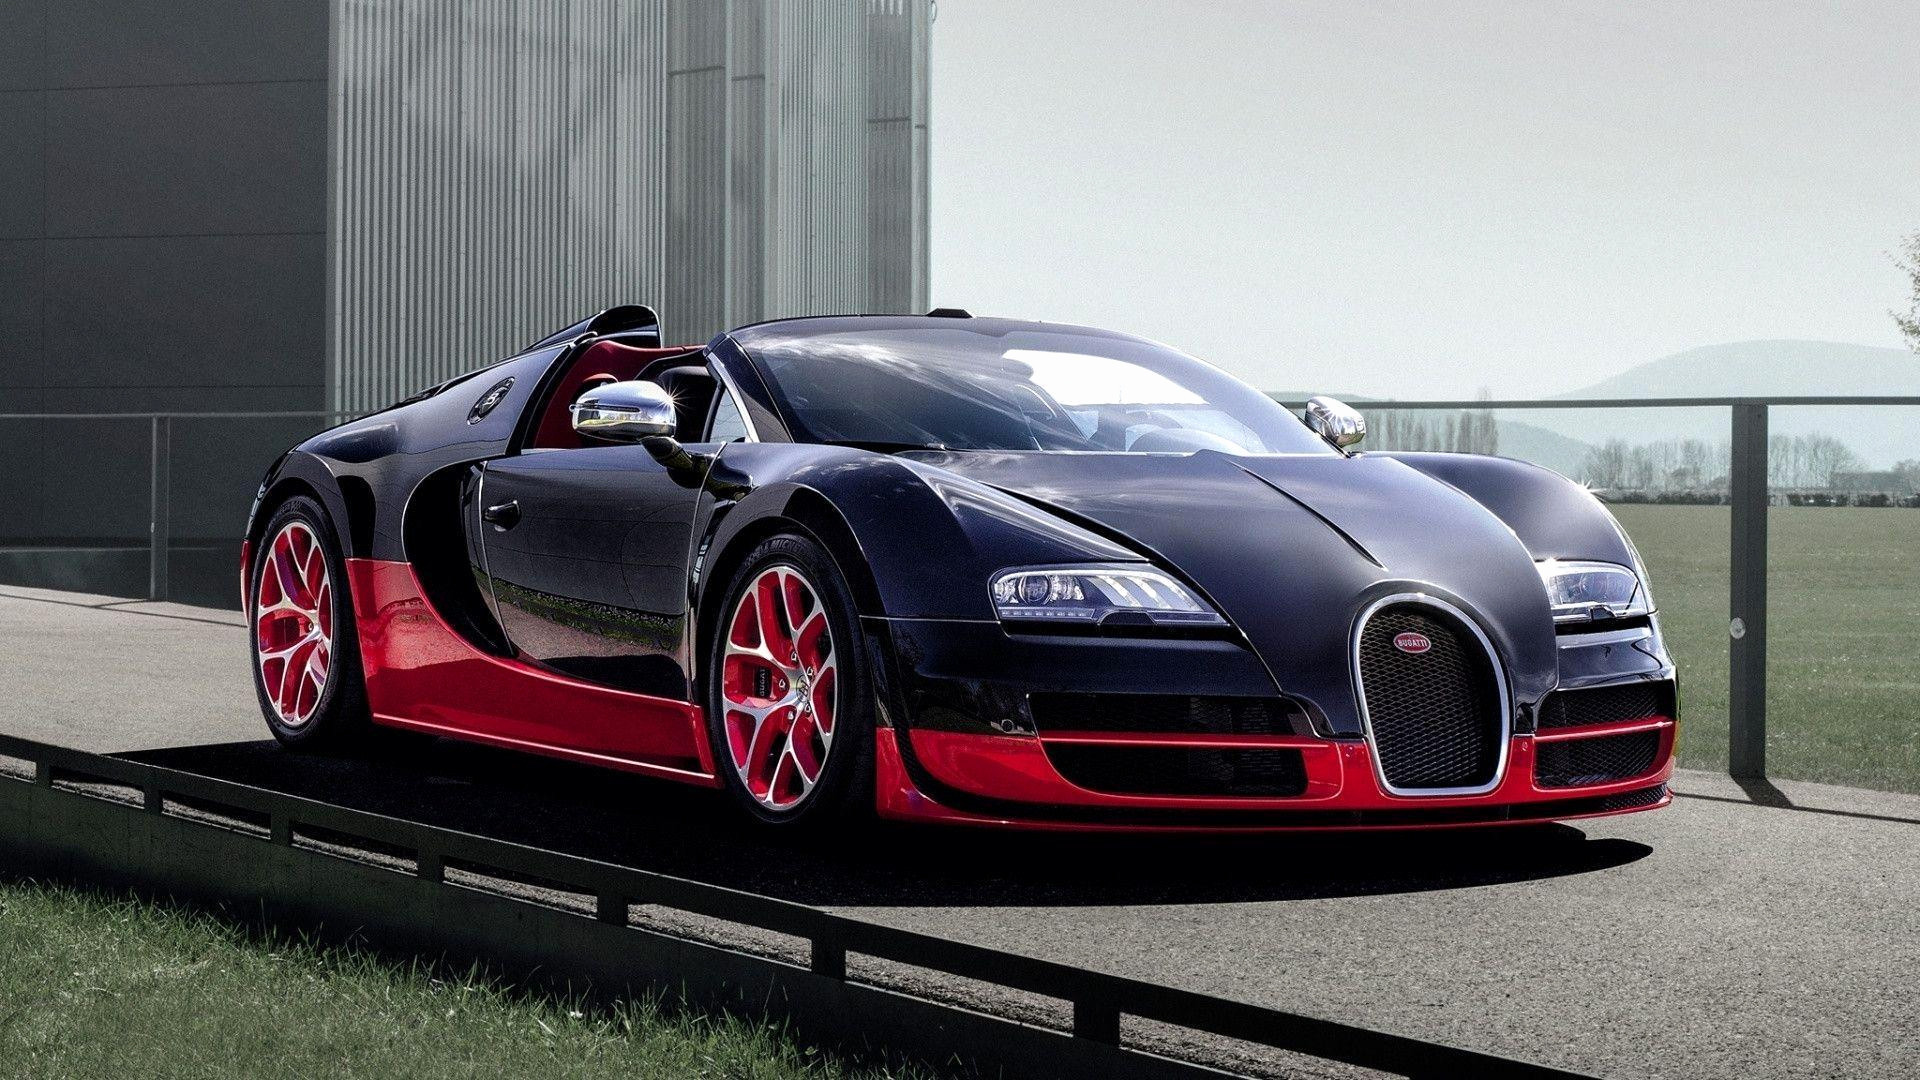 Bugatti Veyron Car Pictures On Hd Quality Bugatti Veyron - Bugatti Veyron Super Sport 2014 , HD Wallpaper & Backgrounds